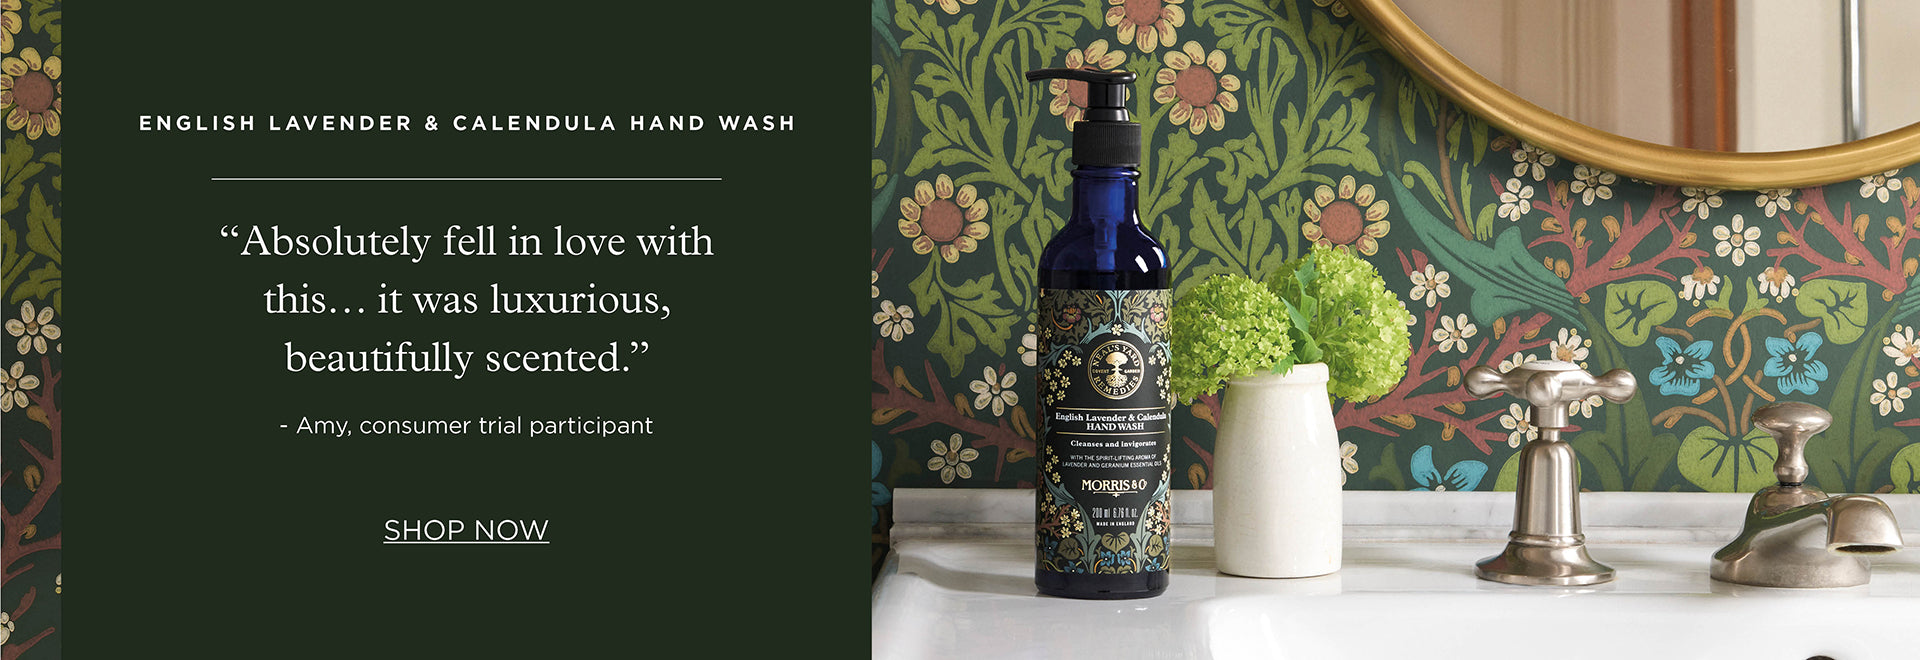 Morris and Co English Organic Lavender and Calendula Hand Wash by Neal's Yard Remedies